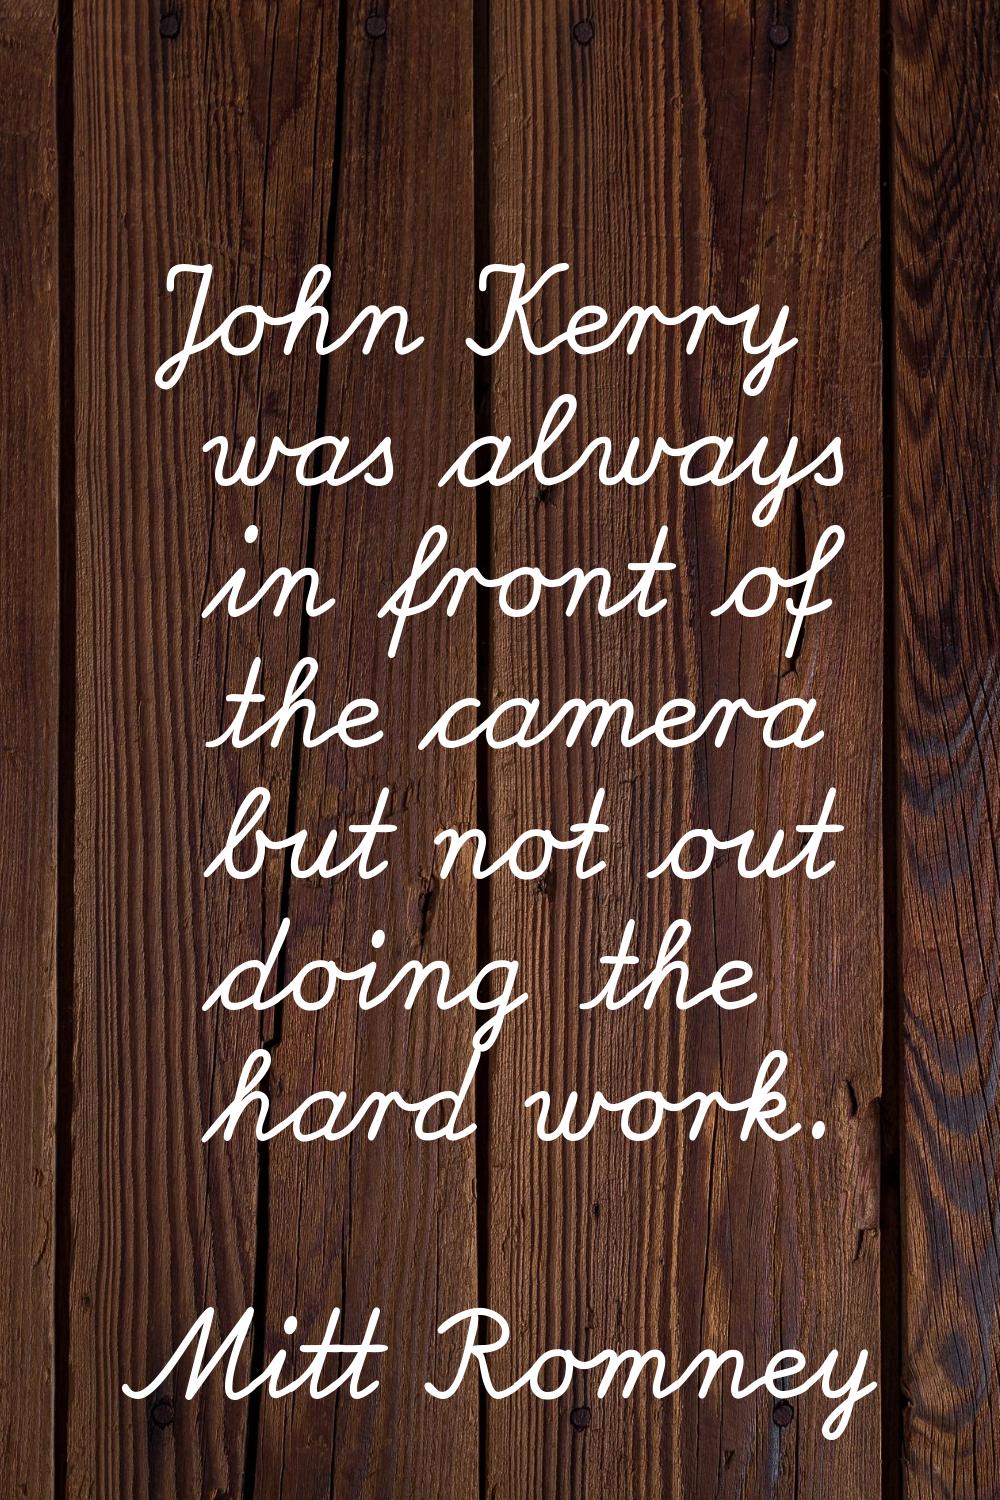 John Kerry was always in front of the camera but not out doing the hard work.